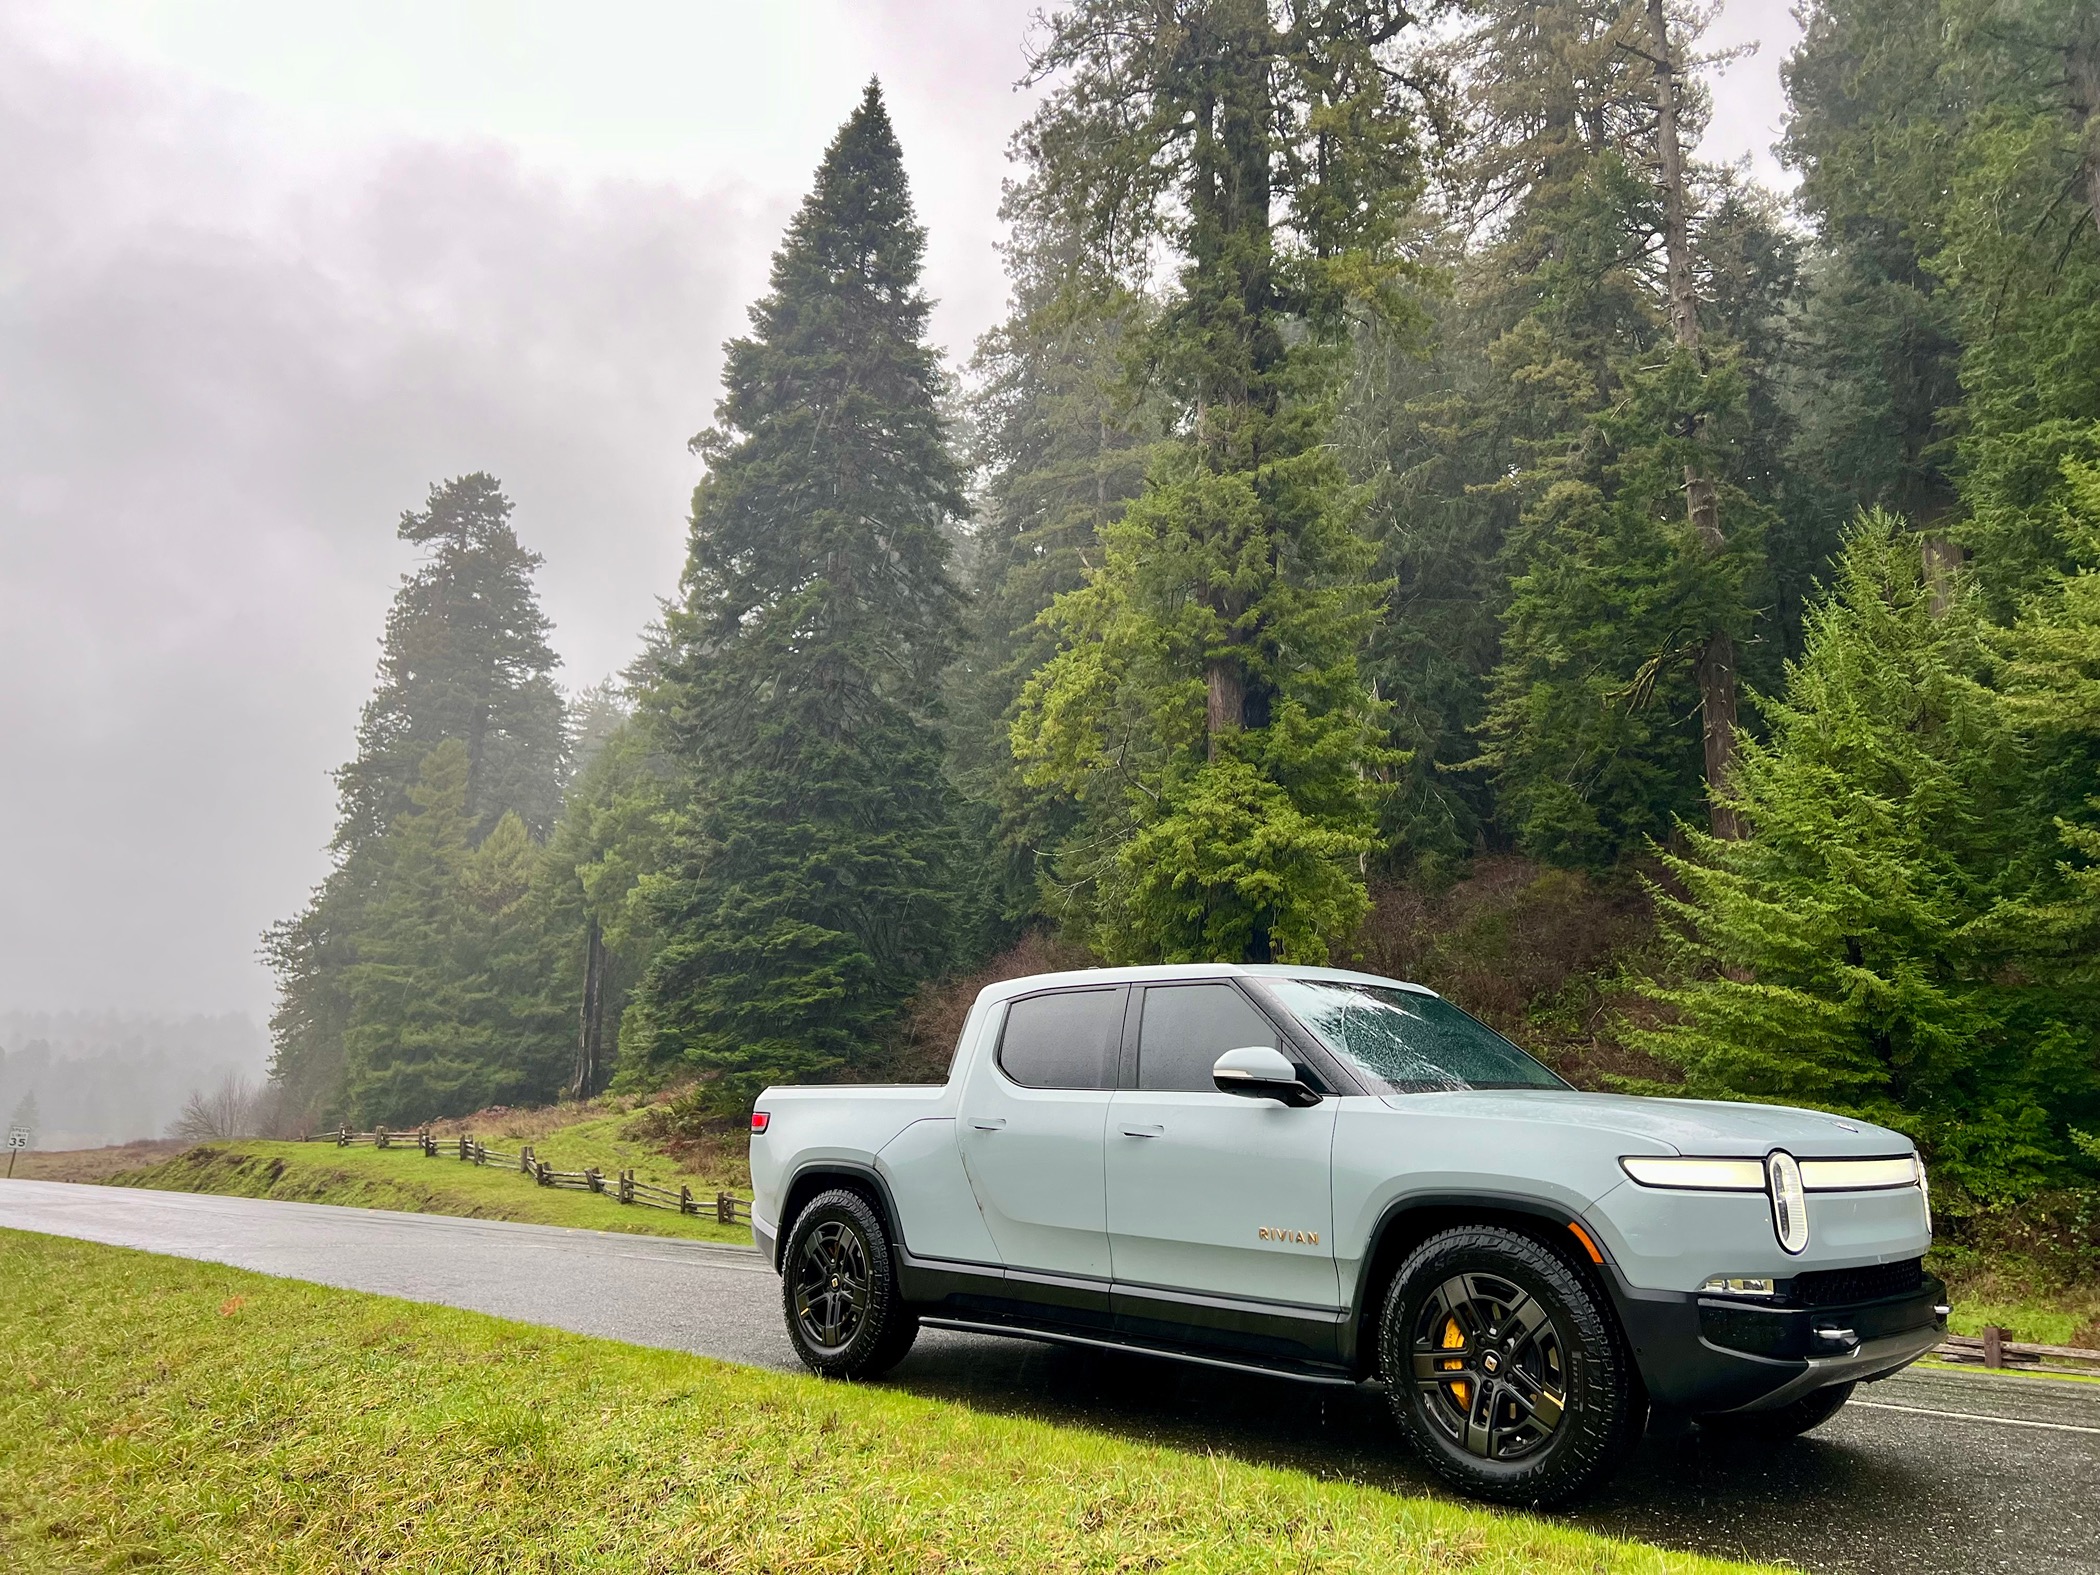 Rivian R1T R1S Random Rivian Photos of the Day - Post Yours! 📸 🤳 IMG_4986